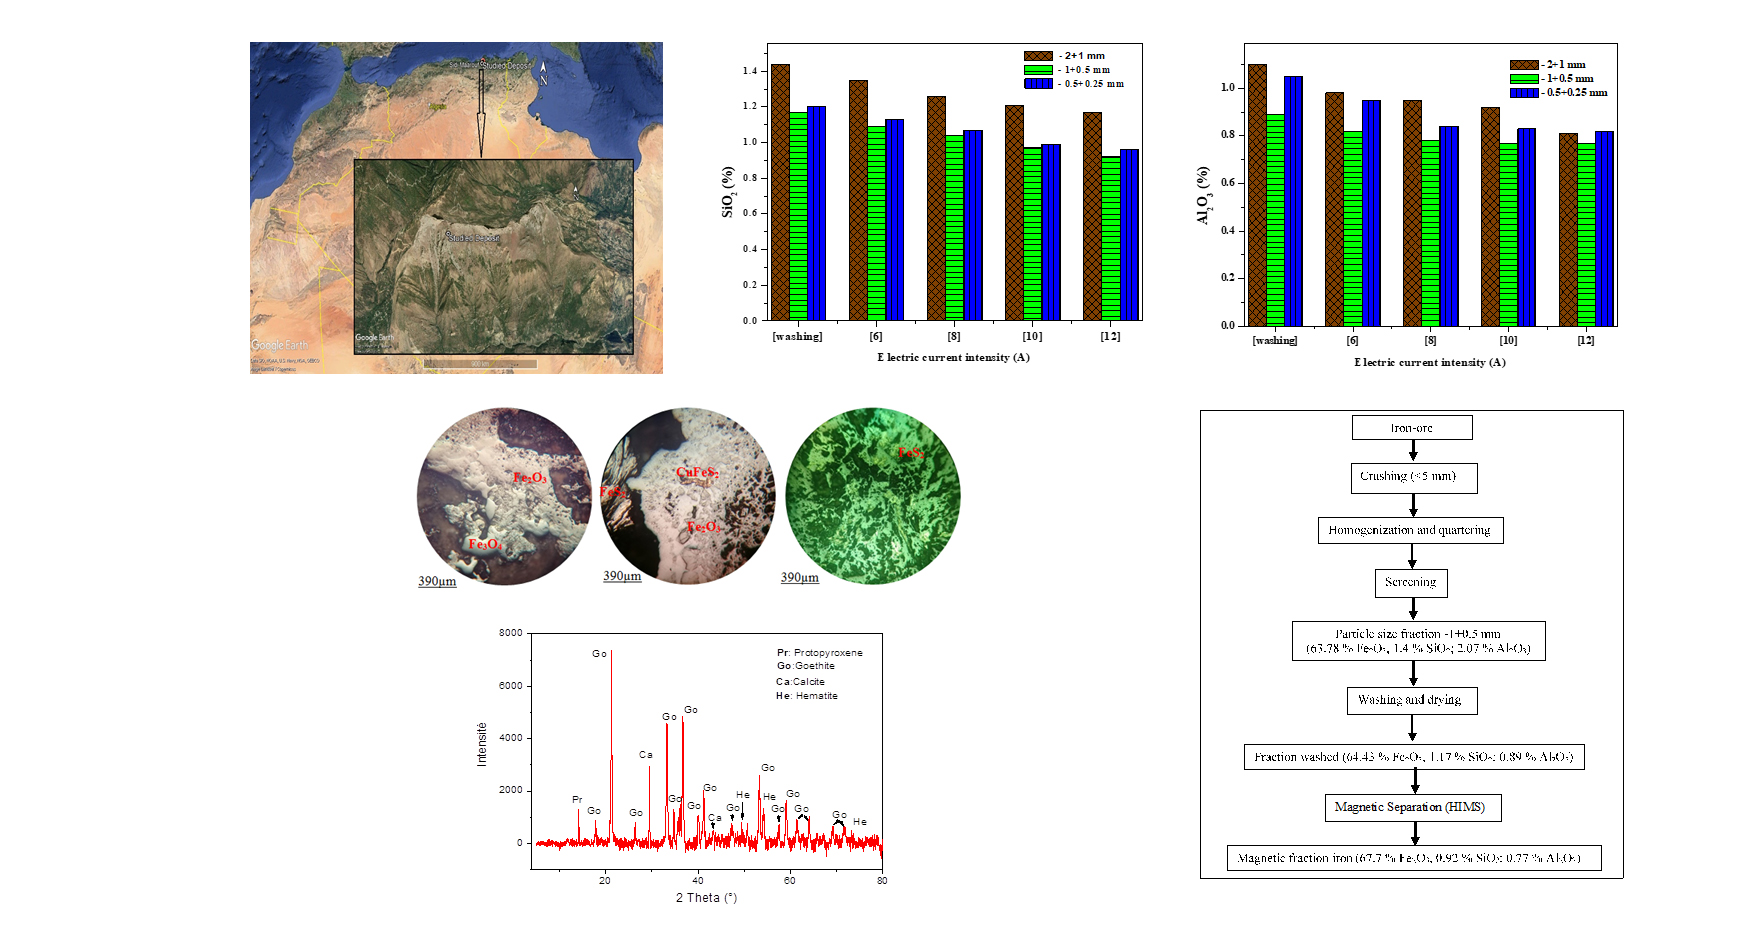 Investigation of physicochemical characterization and magnetic enrichment of iron ore from Sidi Maarouf deposit